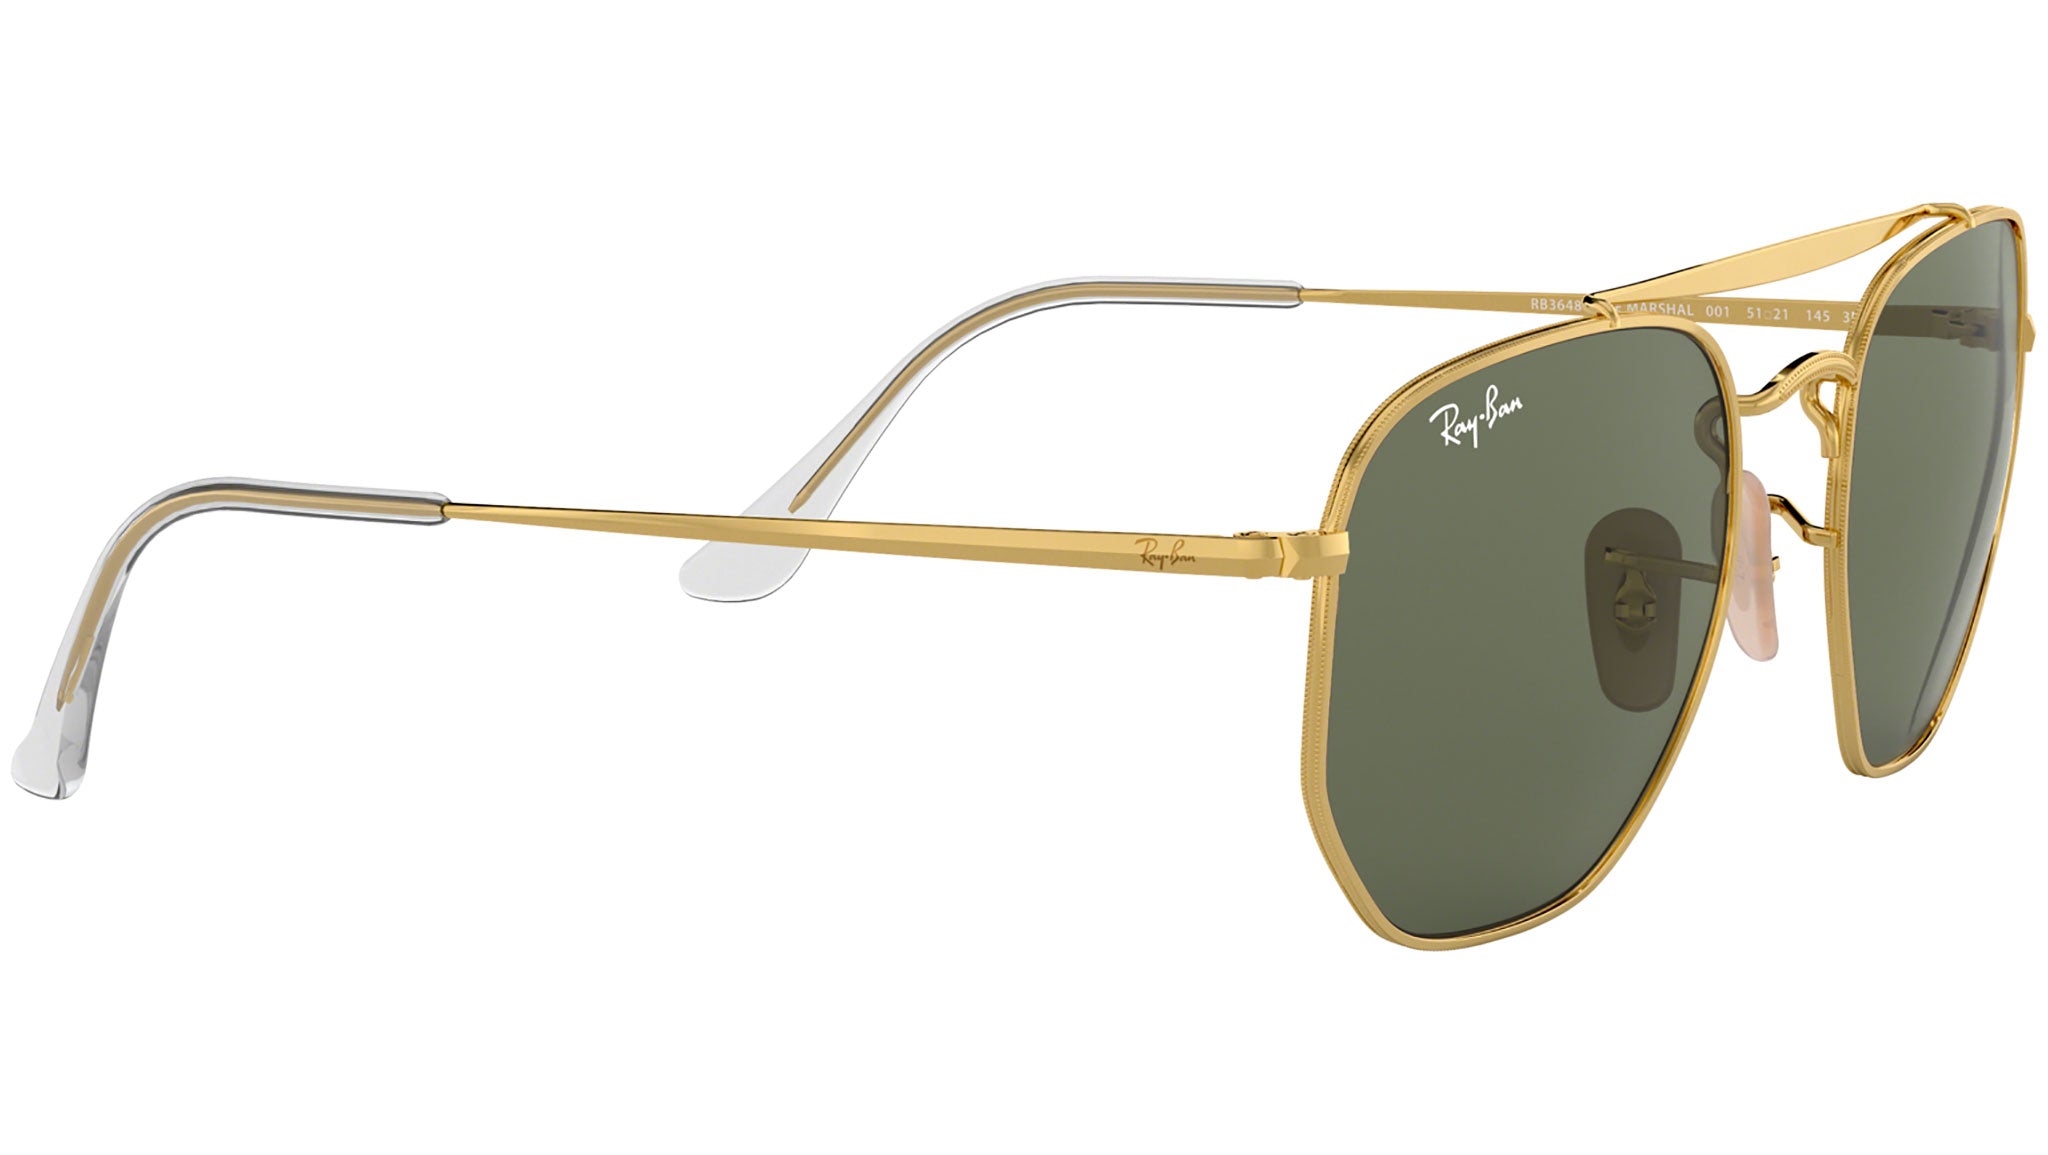 The Marshal RB3648 gold green classic